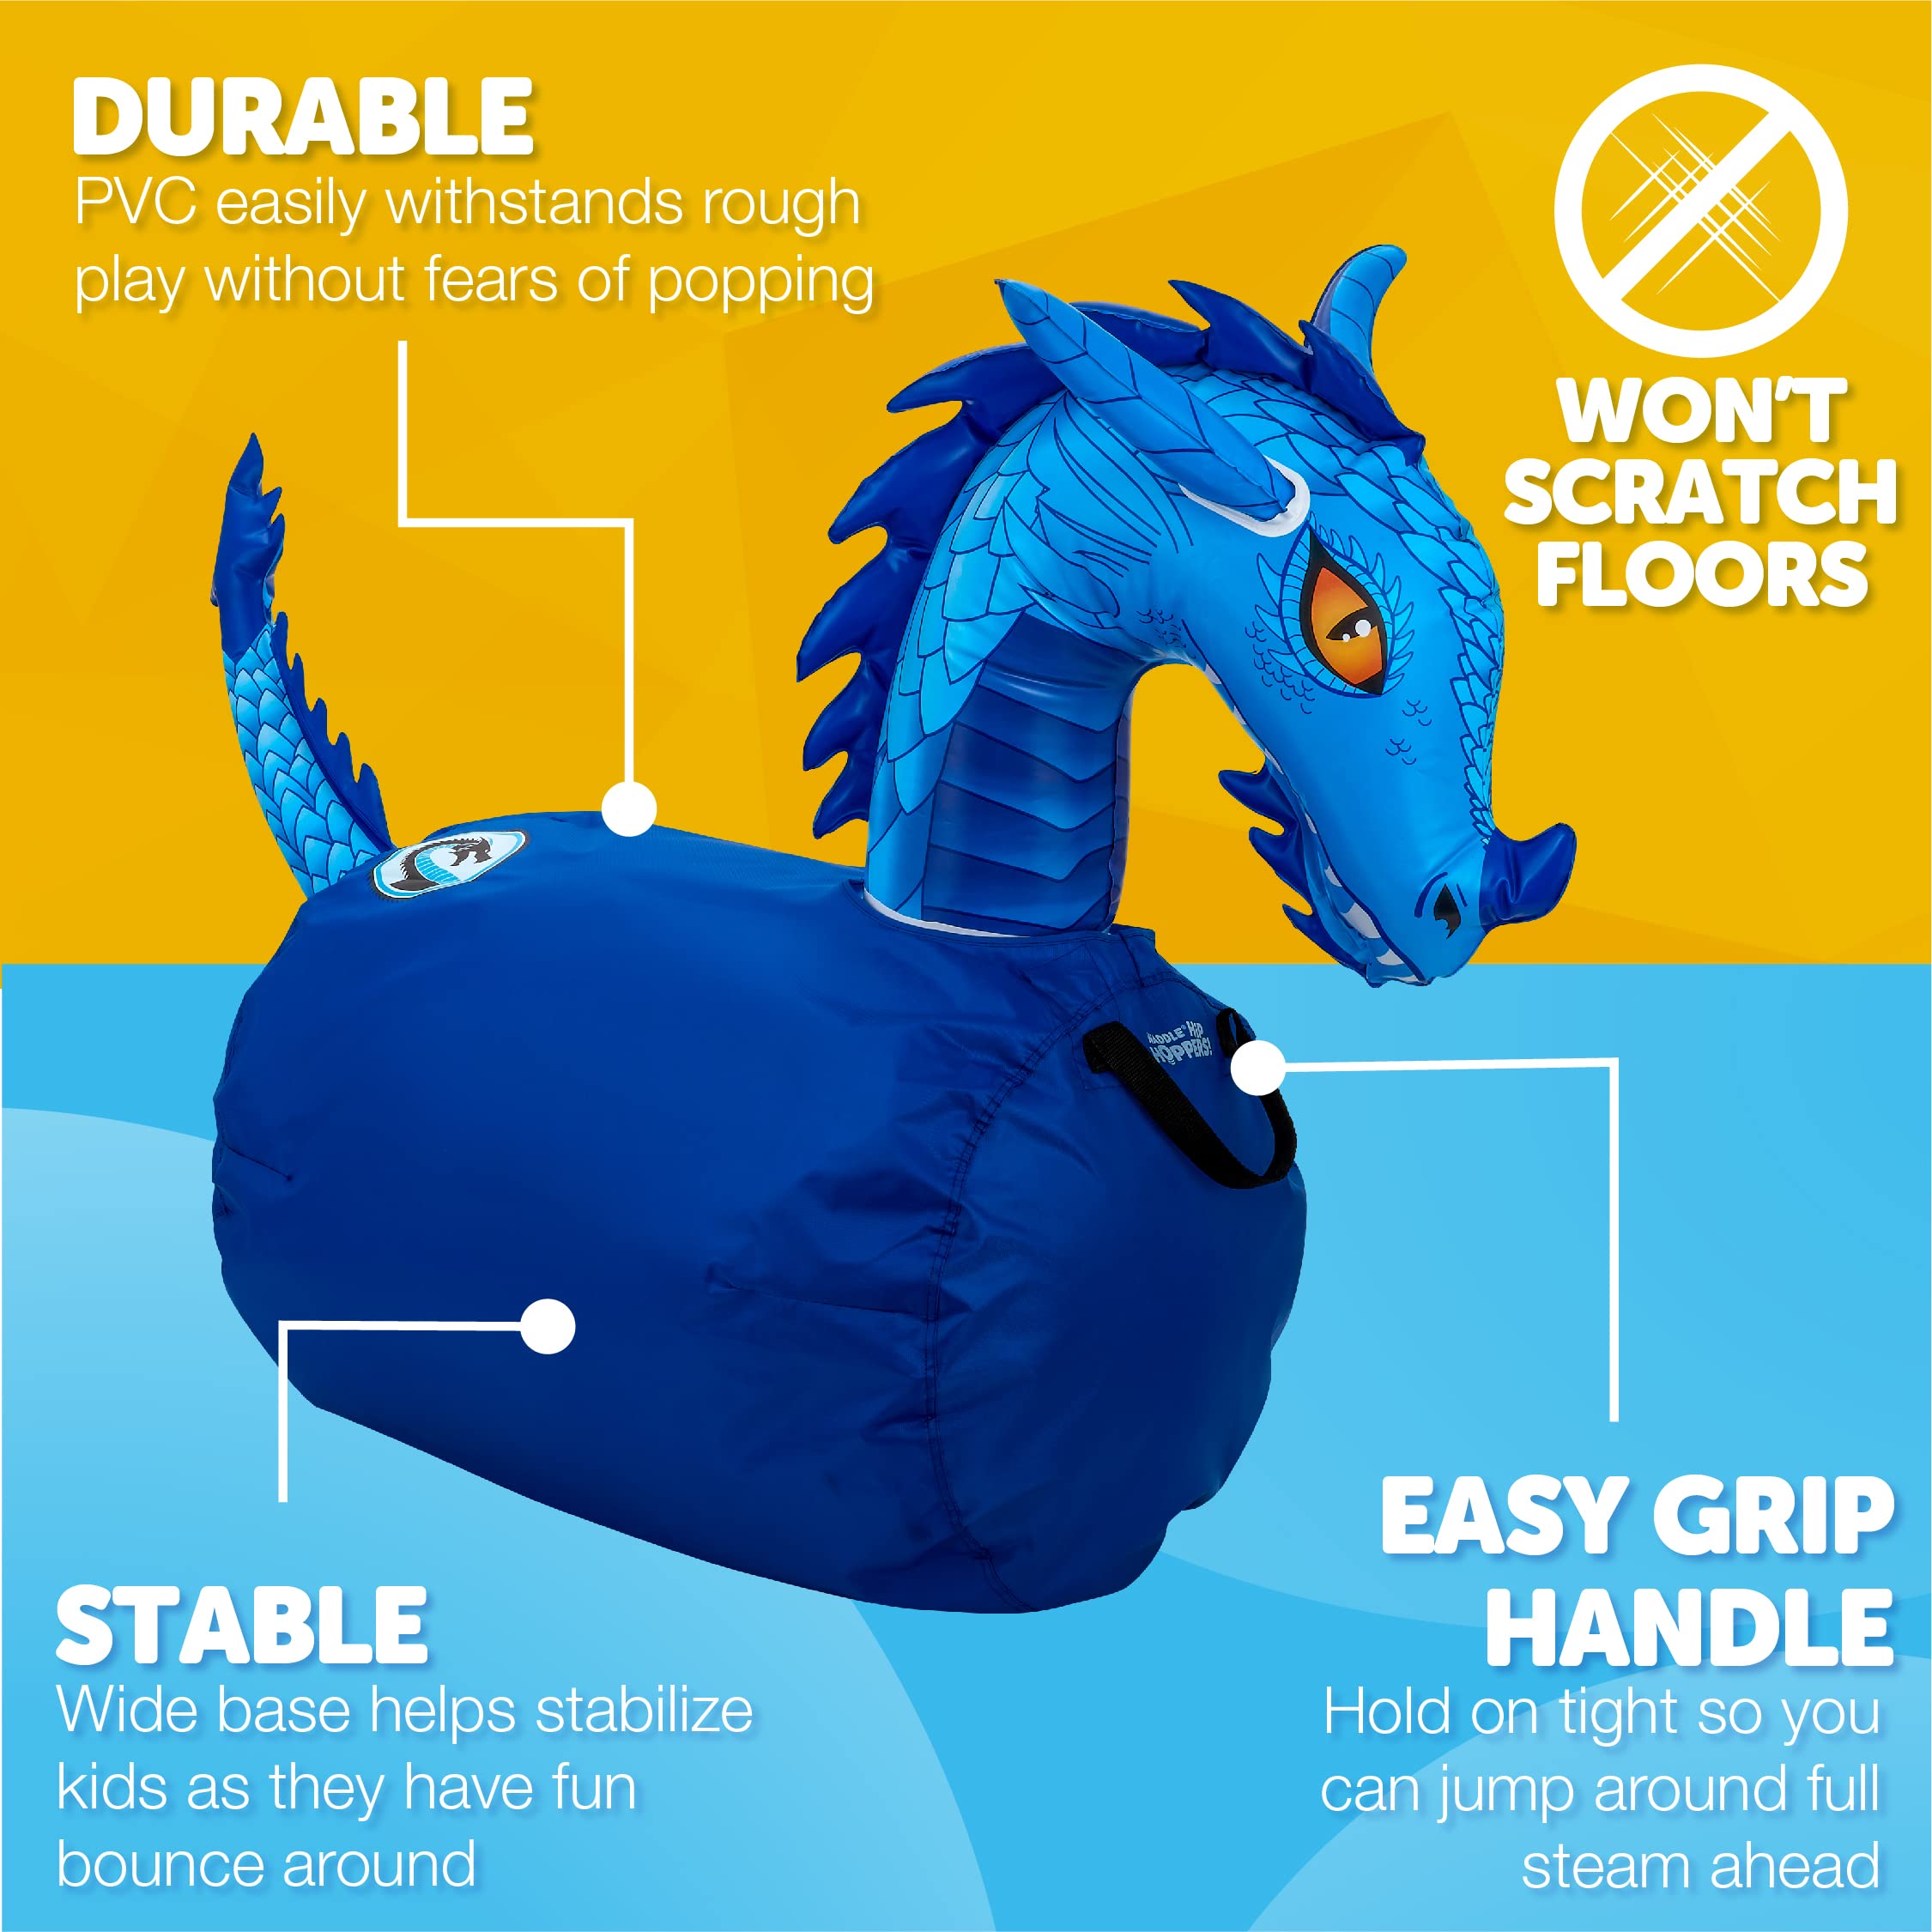 WADDLE Hip Hoppers Large Bouncy Hopper Inflatable Hopping Animal Bouncer, Supports Up to 250 Pounds, Ages 5 and Up (Blue Dragon)